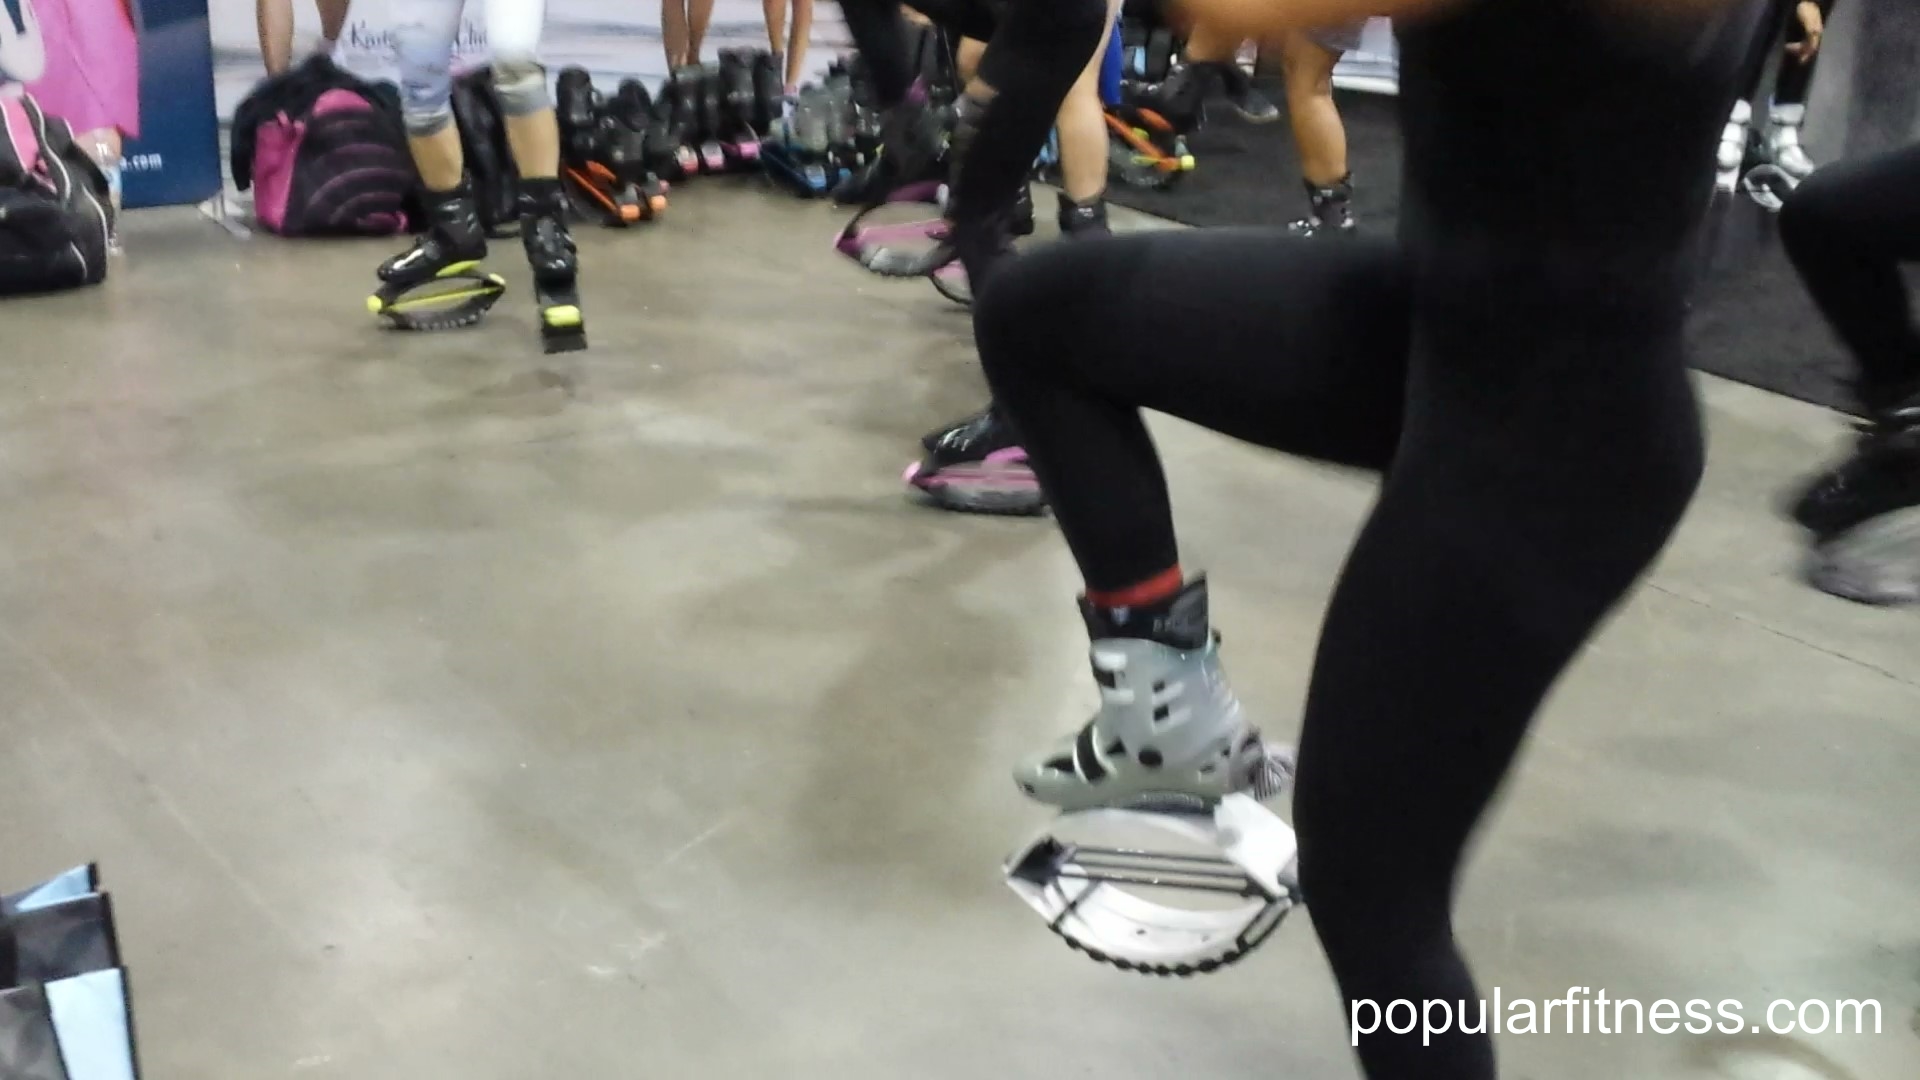 group exercise class wearing kangaroo jump shoes - photo by popular fitness